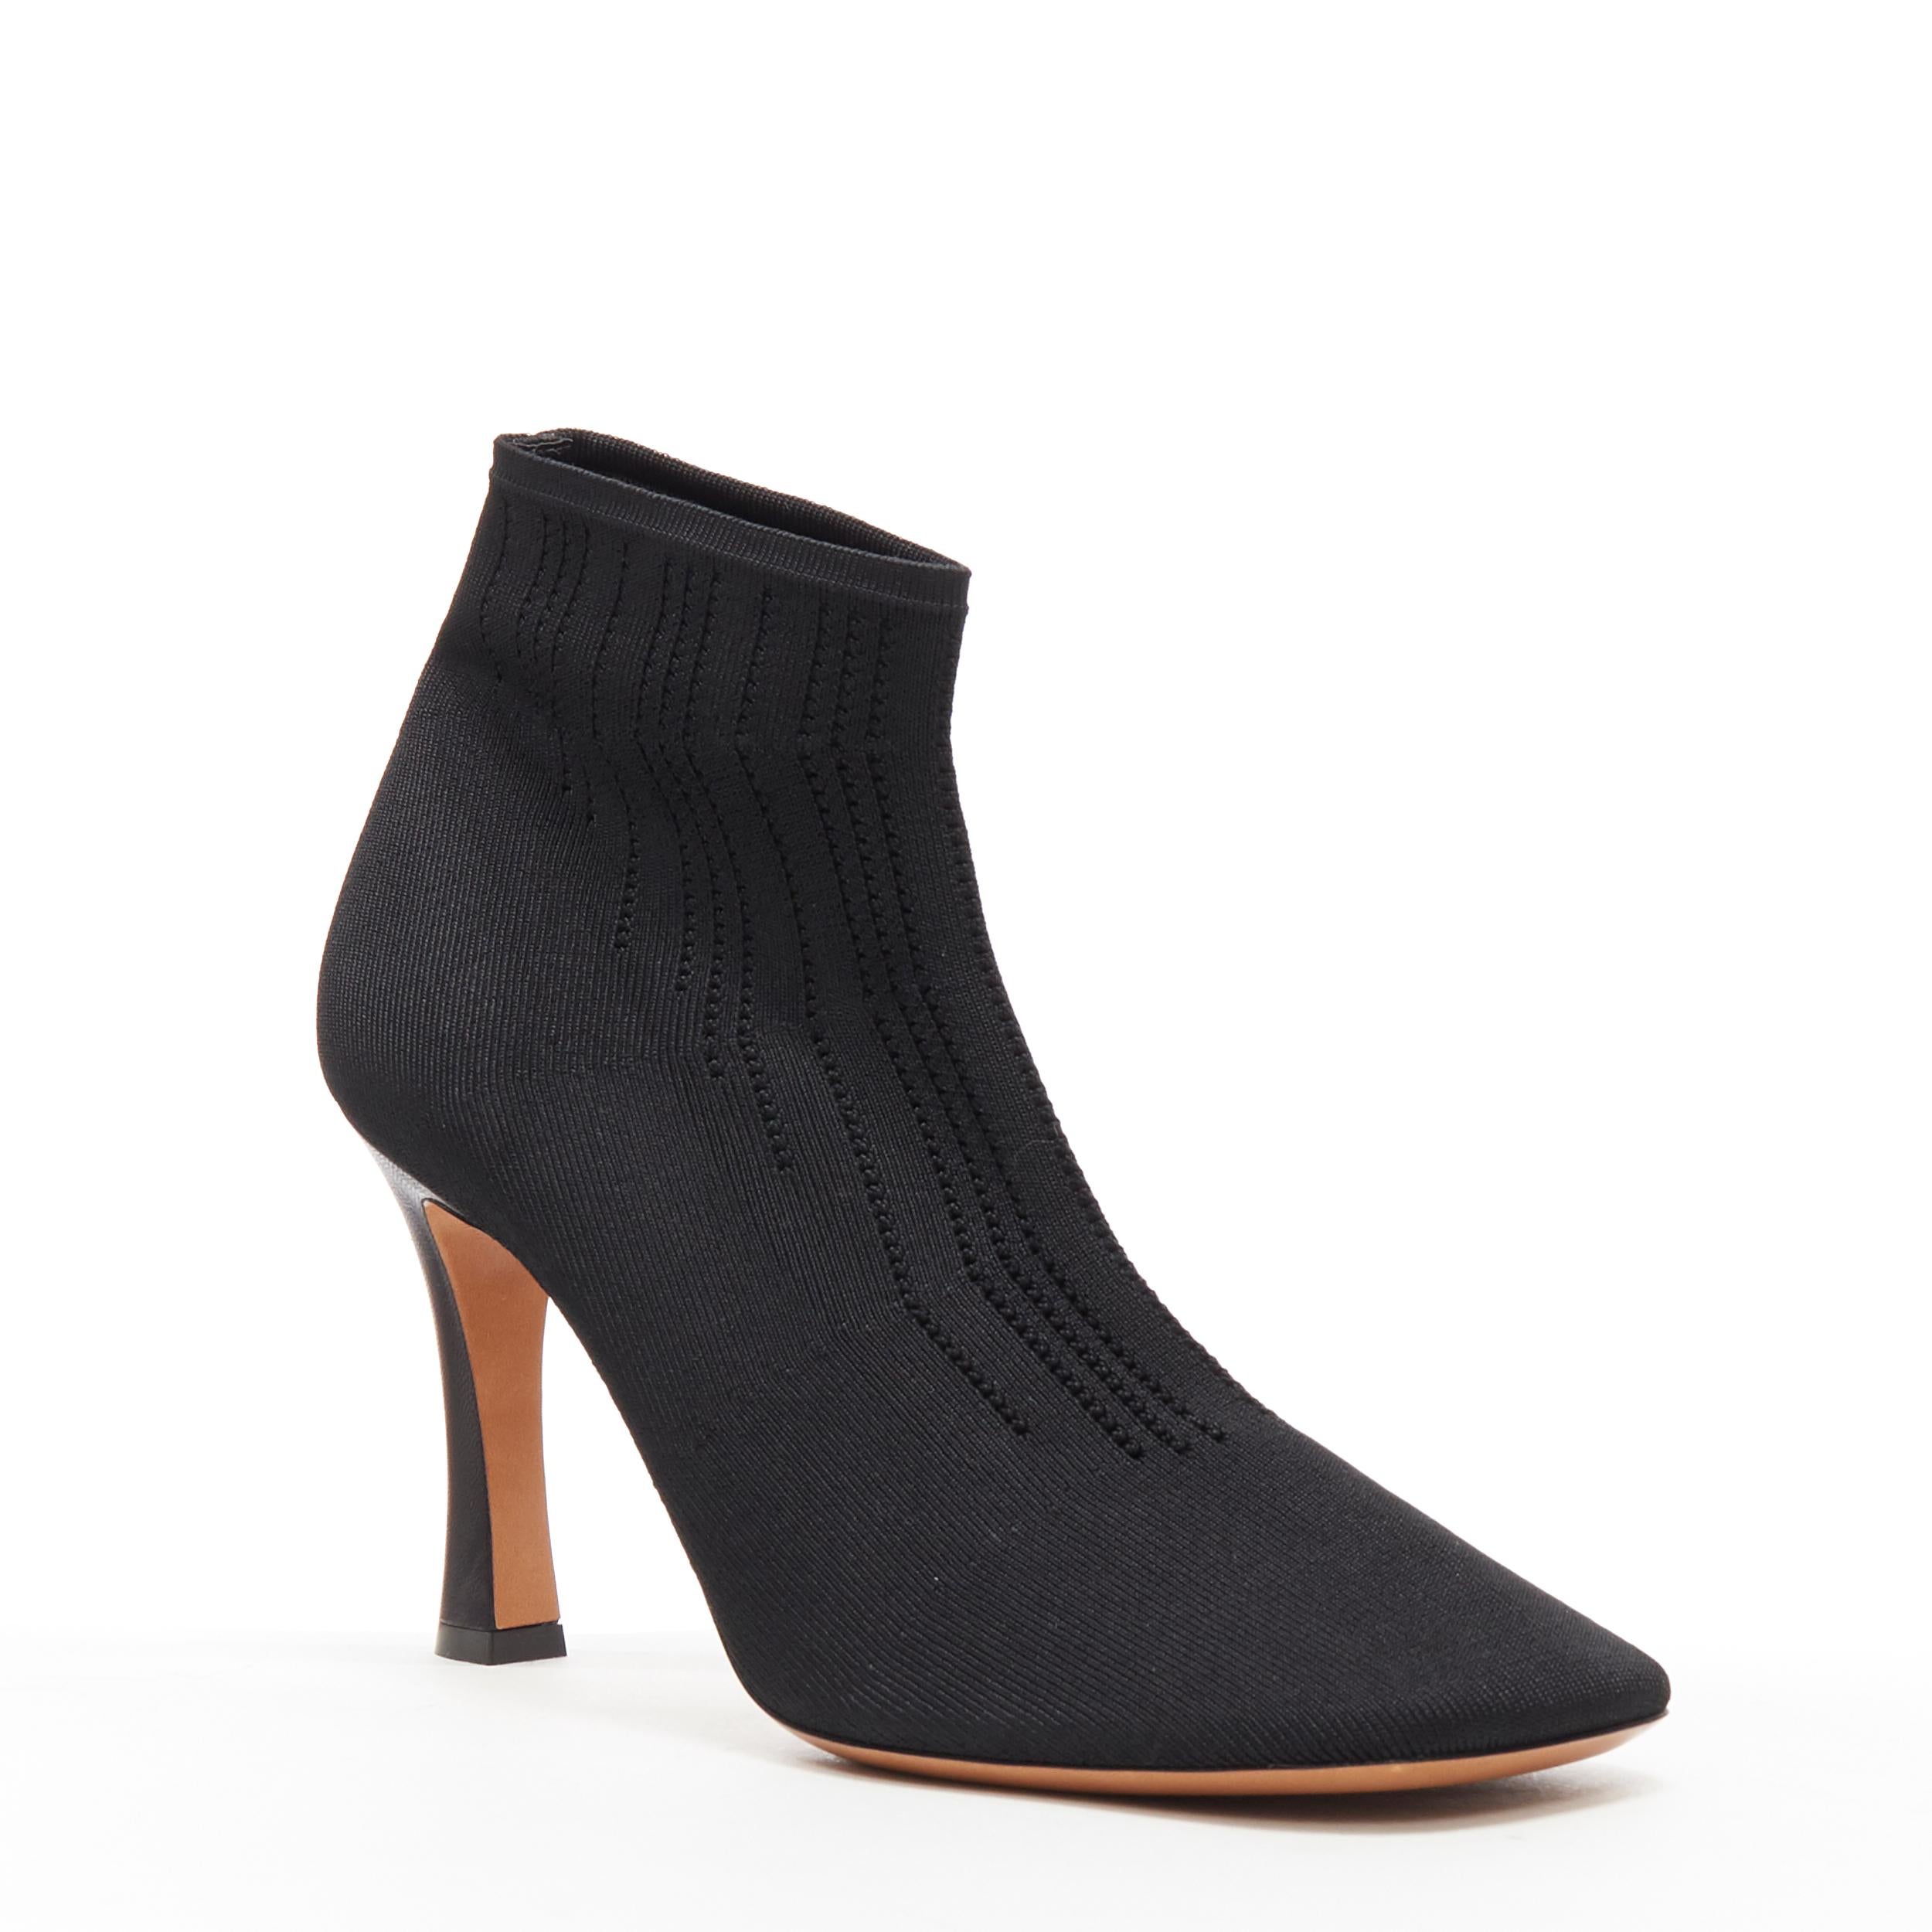 new OLD CELINE Glove Bootie black perforated knit sock square toe boots EU40
Brand: Celine
Designer: Phoebe Philo
Model Name / Style: Glove bootie
Material: Fabric
Color: Black
Pattern: Solid
Closure: Slip on
Extra Detail: High (3-3.9 in) heel